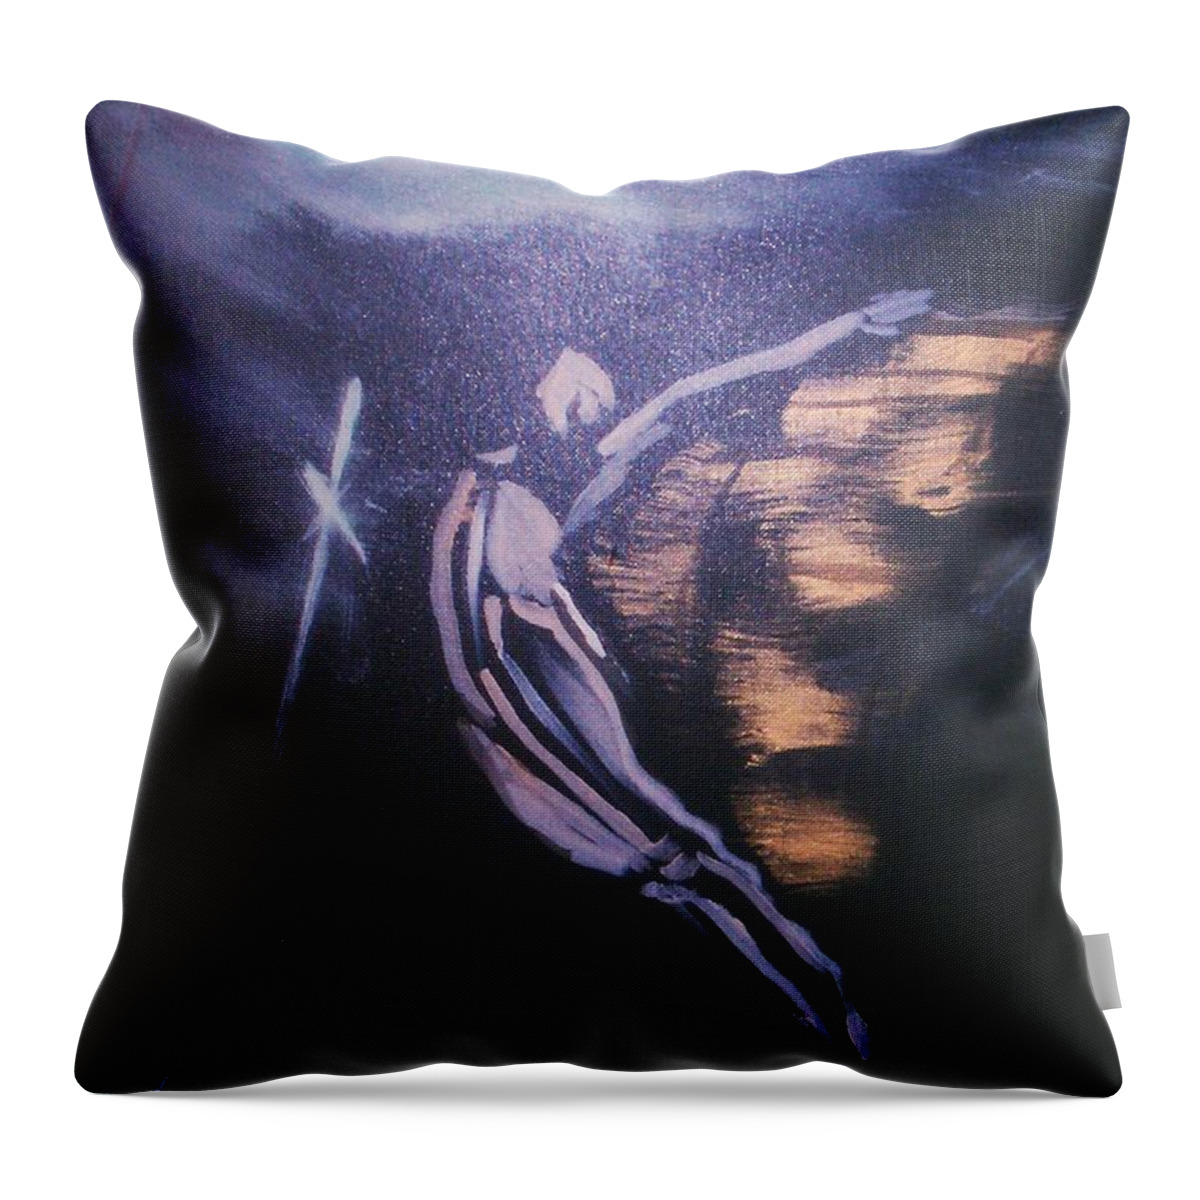 Spirit Raising Rest In Peace Throw Pillow featuring the painting Spirit Raising by Tyrone Hart